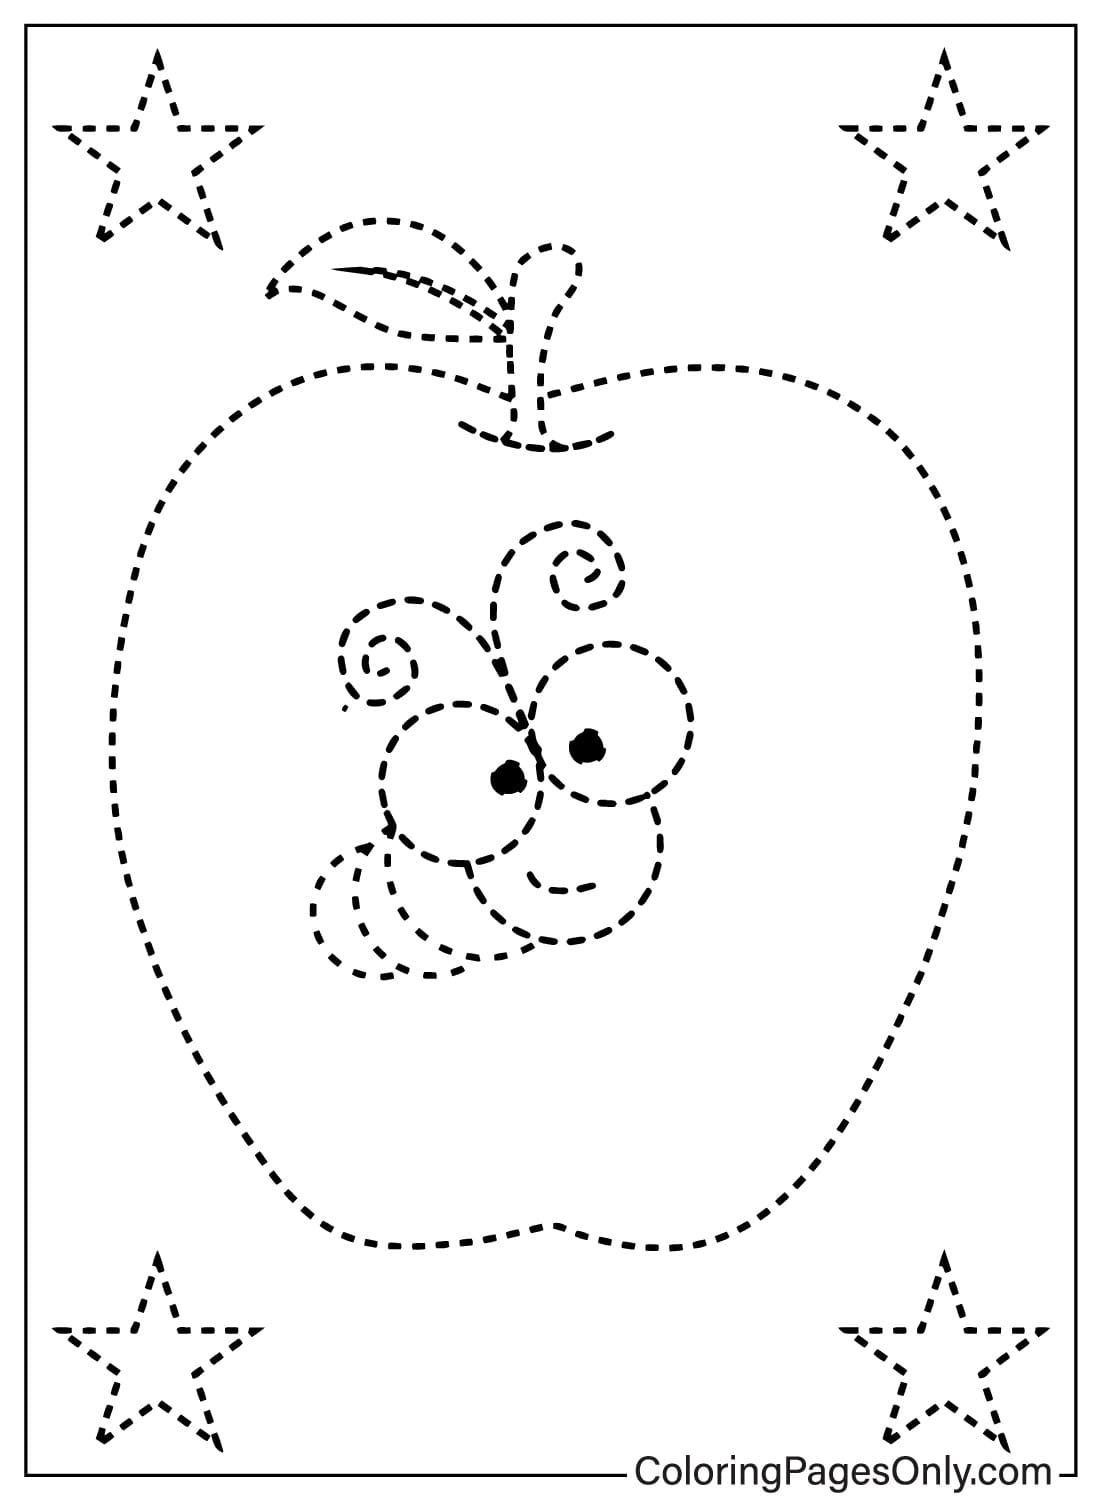 Tracing Coloring Page to Printable from Tracing